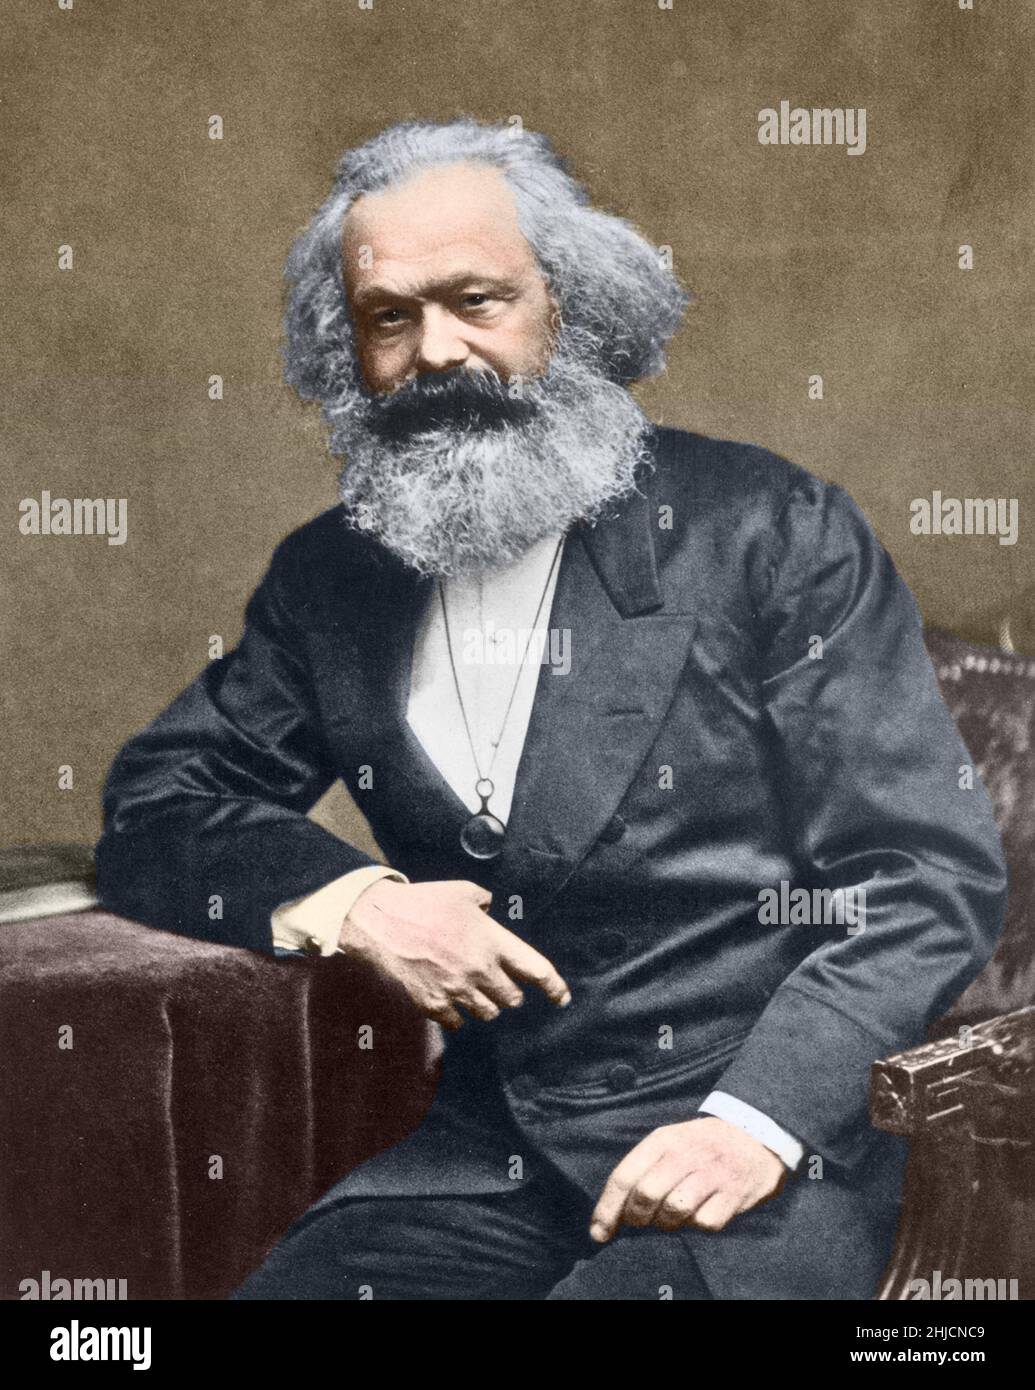 Karl Heinrich Marx (1818-1883) was a German philosopher, economist, sociologist, historian, journalist, and revolutionary socialist. His ideas played a significant role in the development of social science and the socialist political movement. He published various books during his lifetime, with the most notable being The Communist Manifesto (1848) and Capital (1867-1894); some of his works were co-written with his friend German revolutionary socialist, Friedrich Engels. Stock Photo